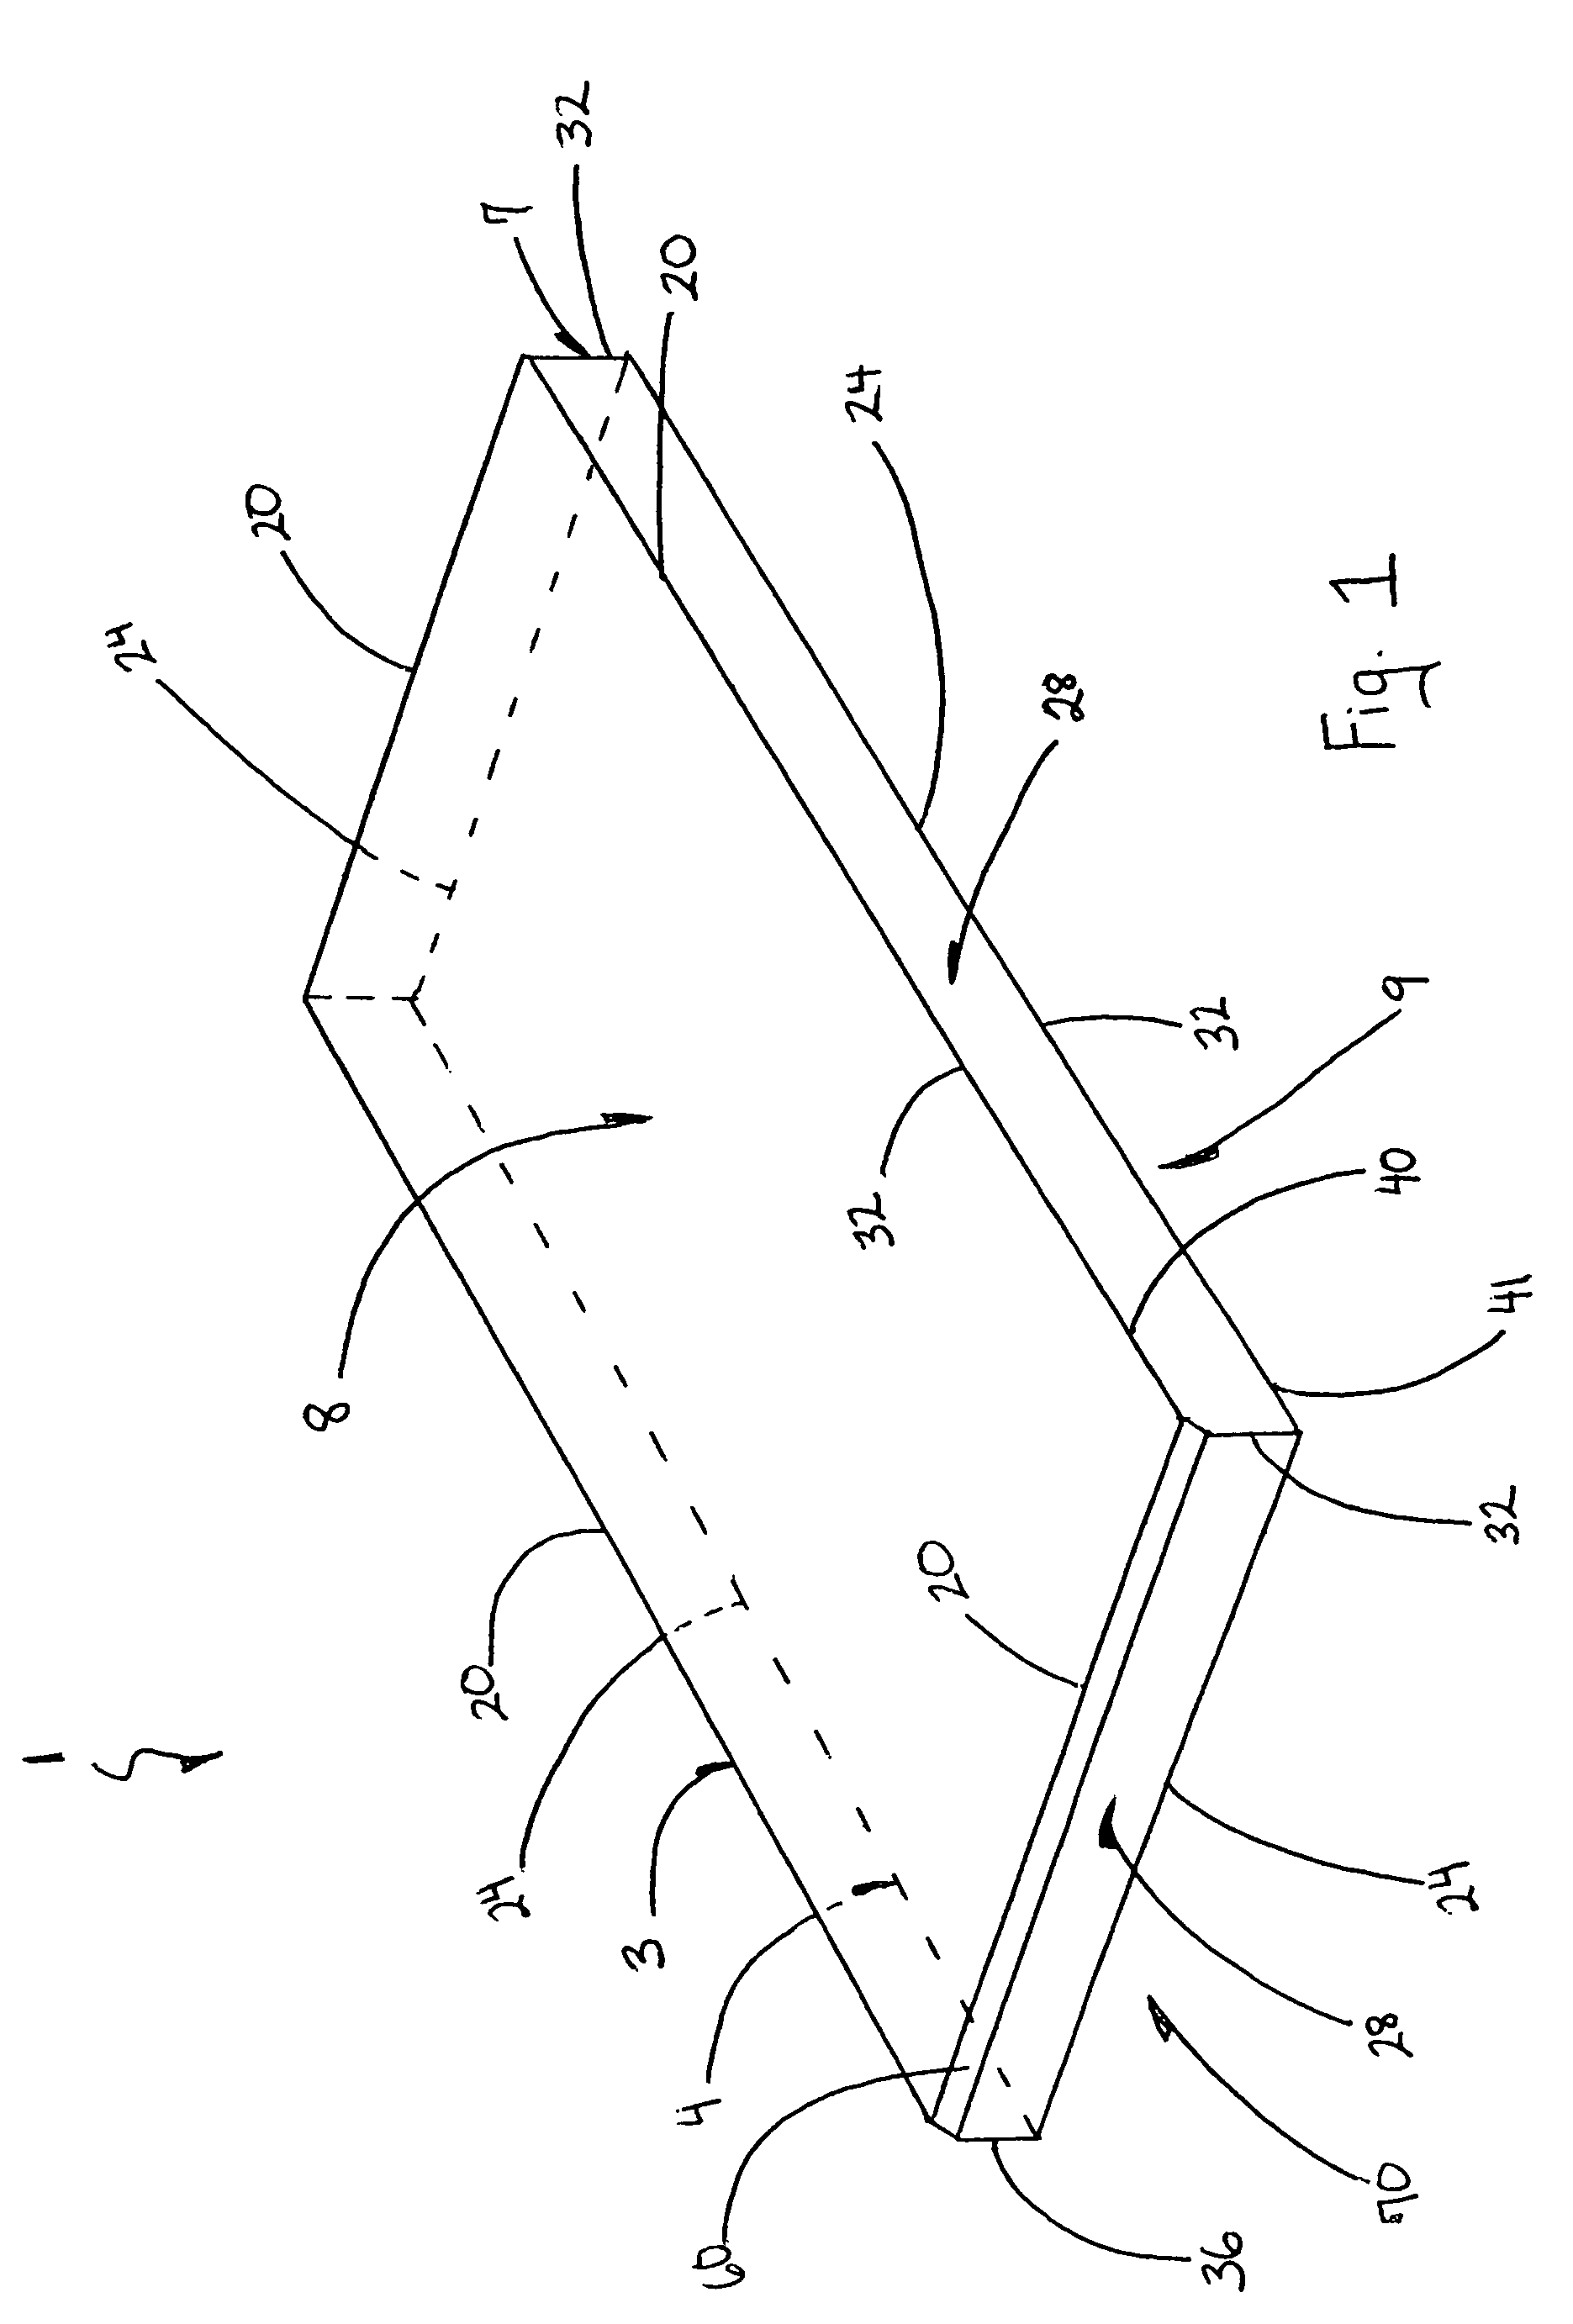 Process for manufacturing wood-based composite panel with reduced top surface edge flare